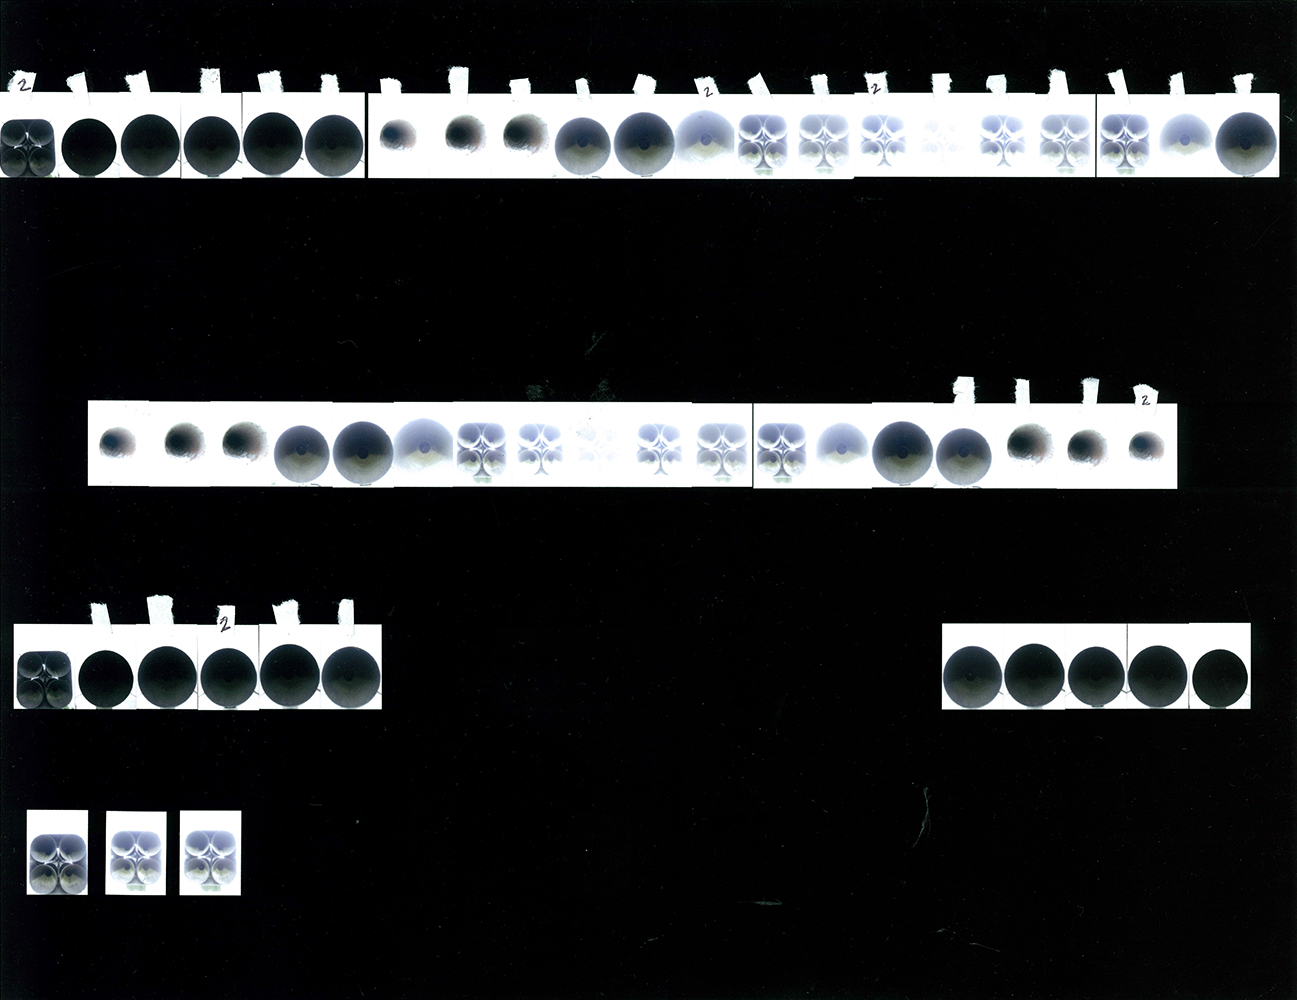 Contact Sheet of Nike Missiles for a Moon Calendar , "Trilogy (o). (Inkjet Print) 2012